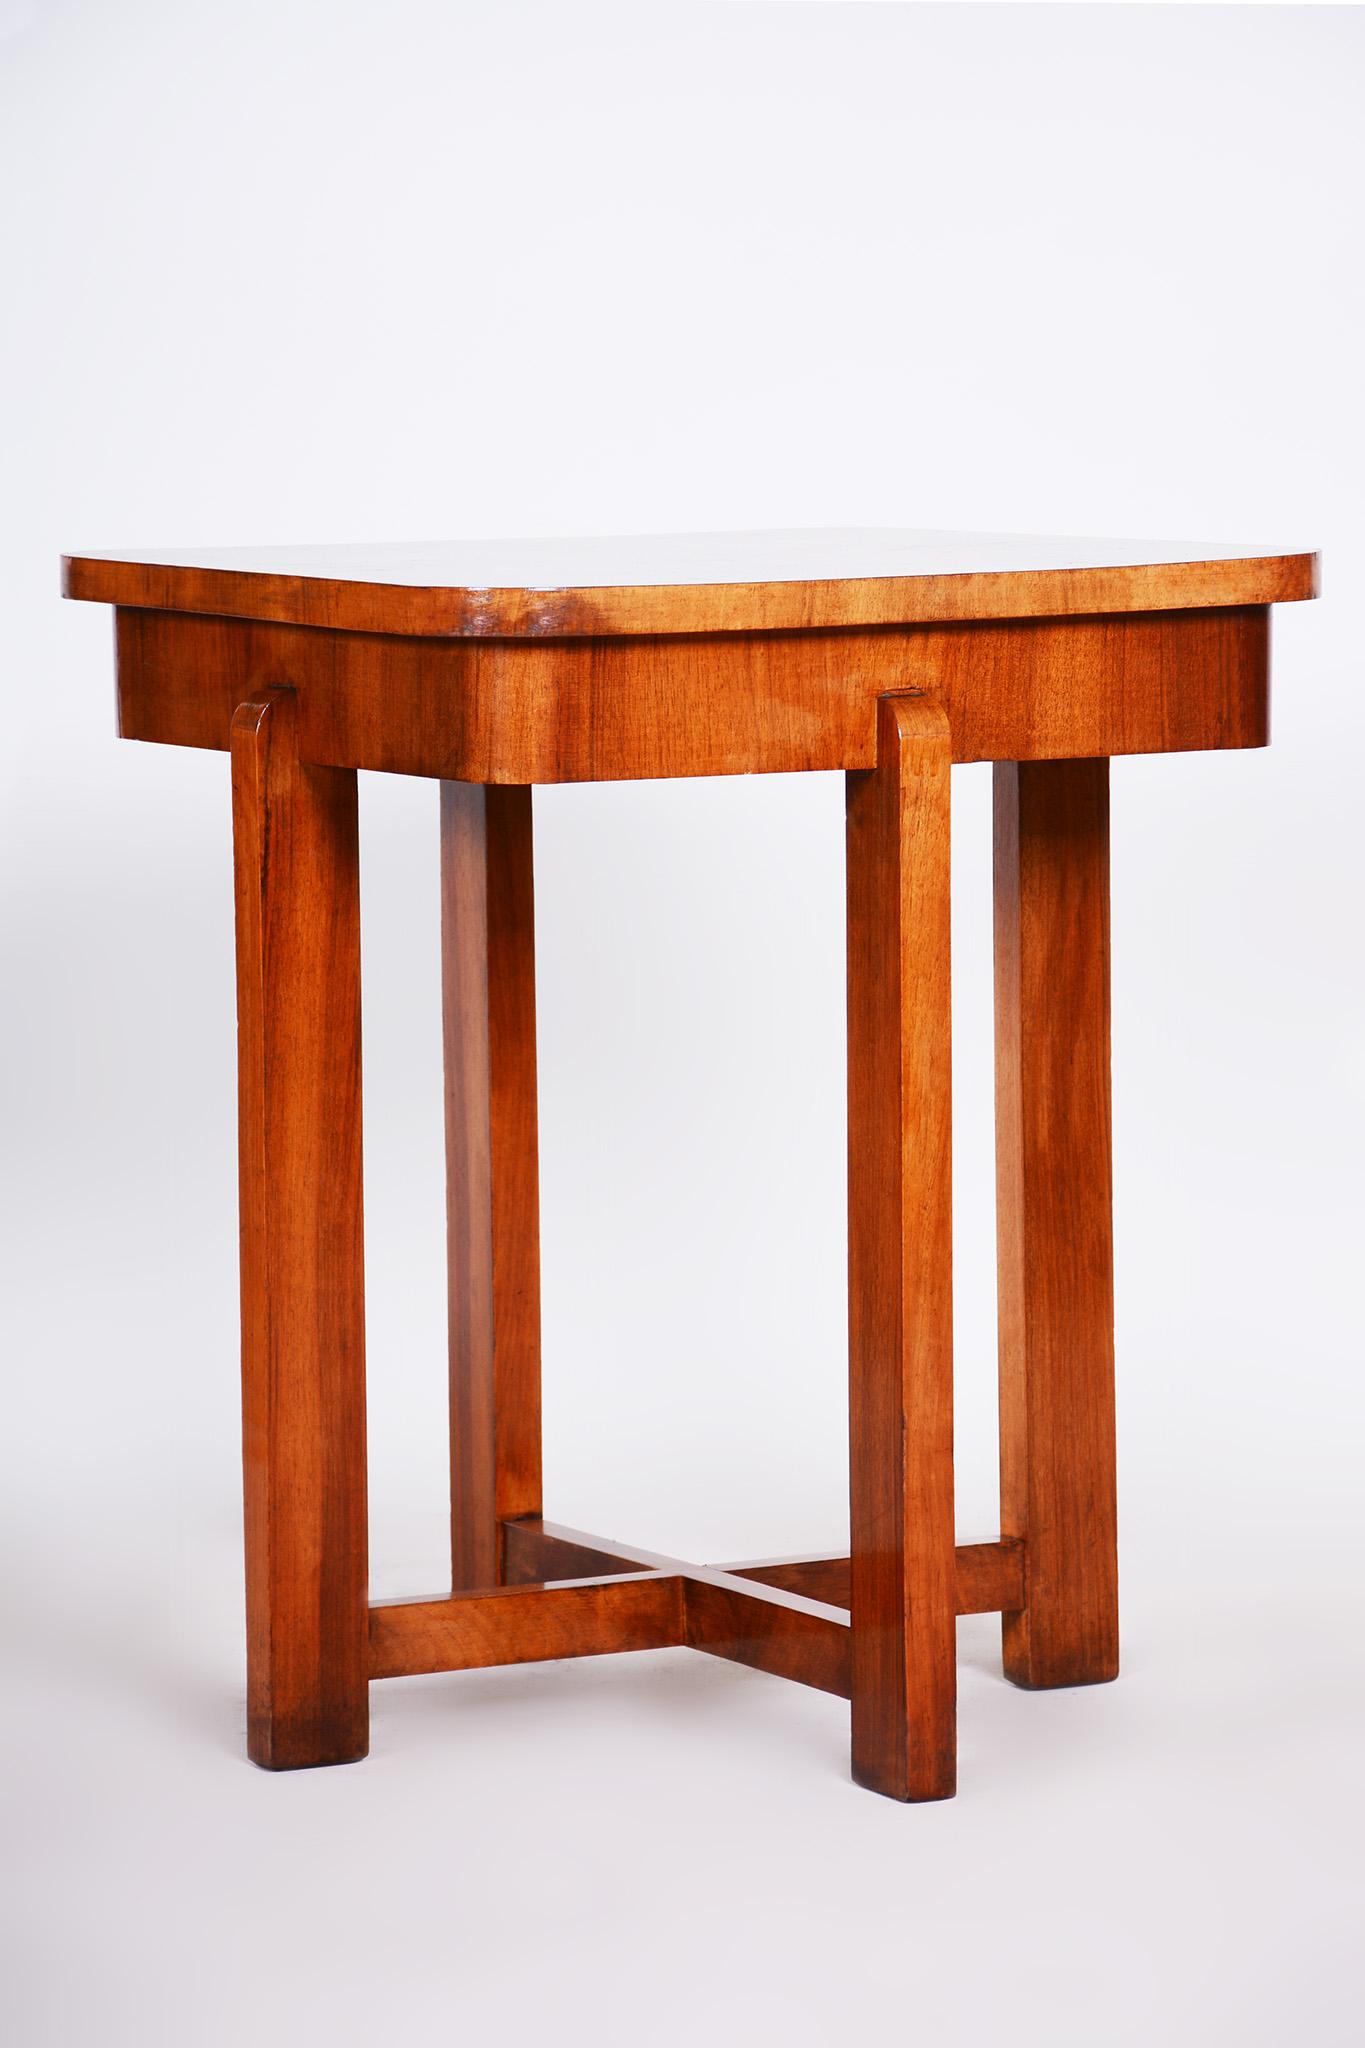 Mid-20th Century Small Czech Art Deco Table, Made in the 1930s Out of Walnut, Fully Restored